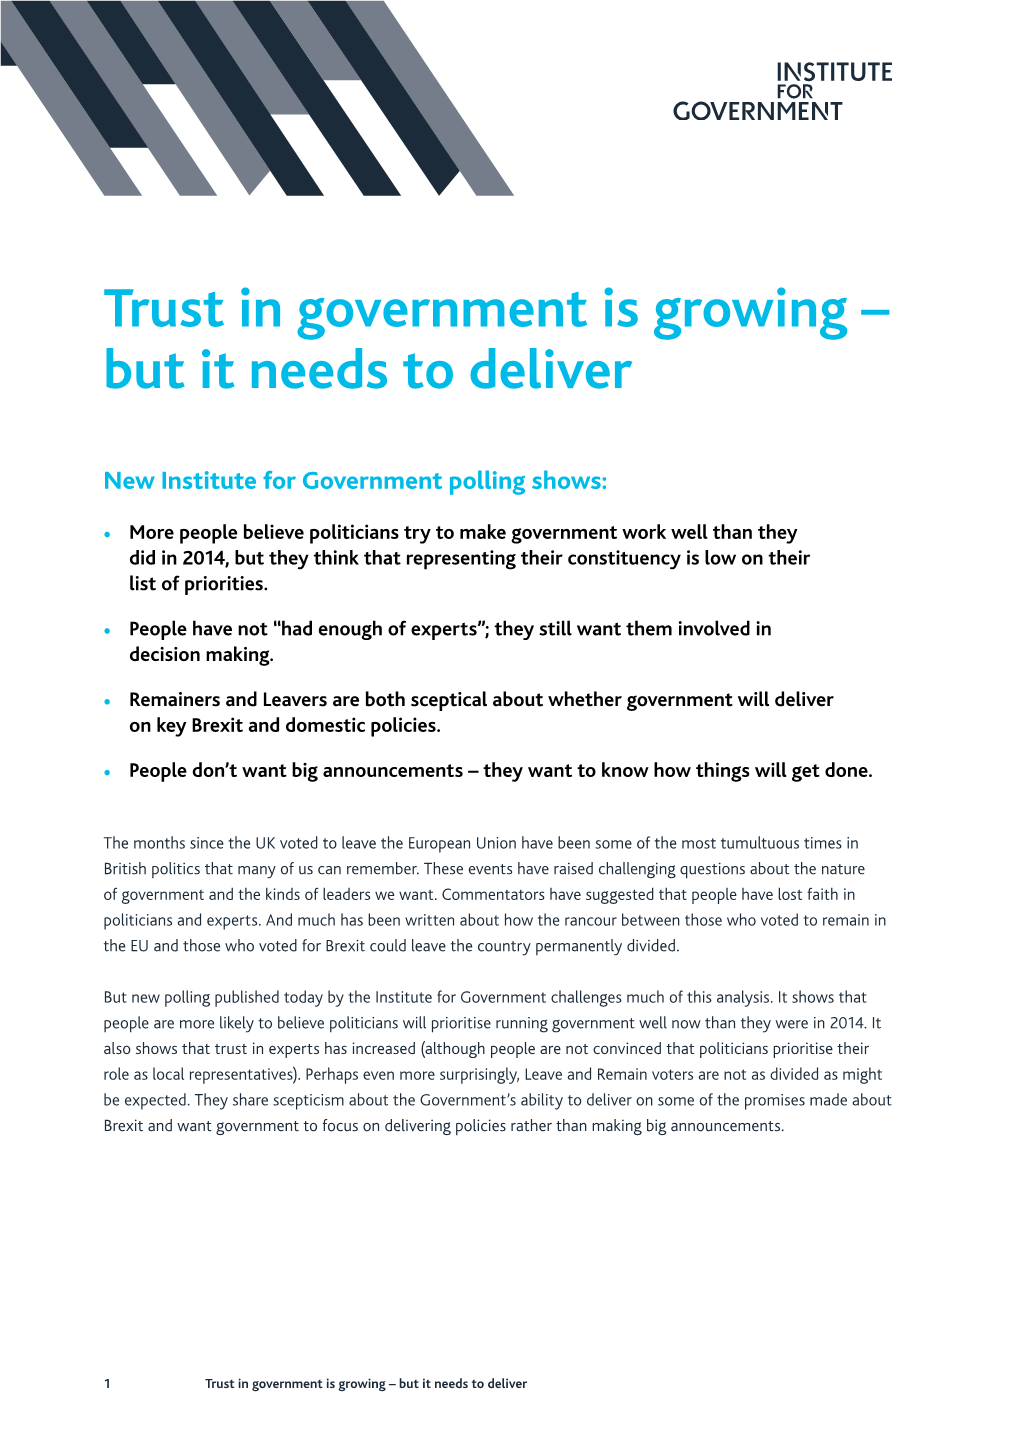 Trust in Government Is Growing – but It Needs to Deliver